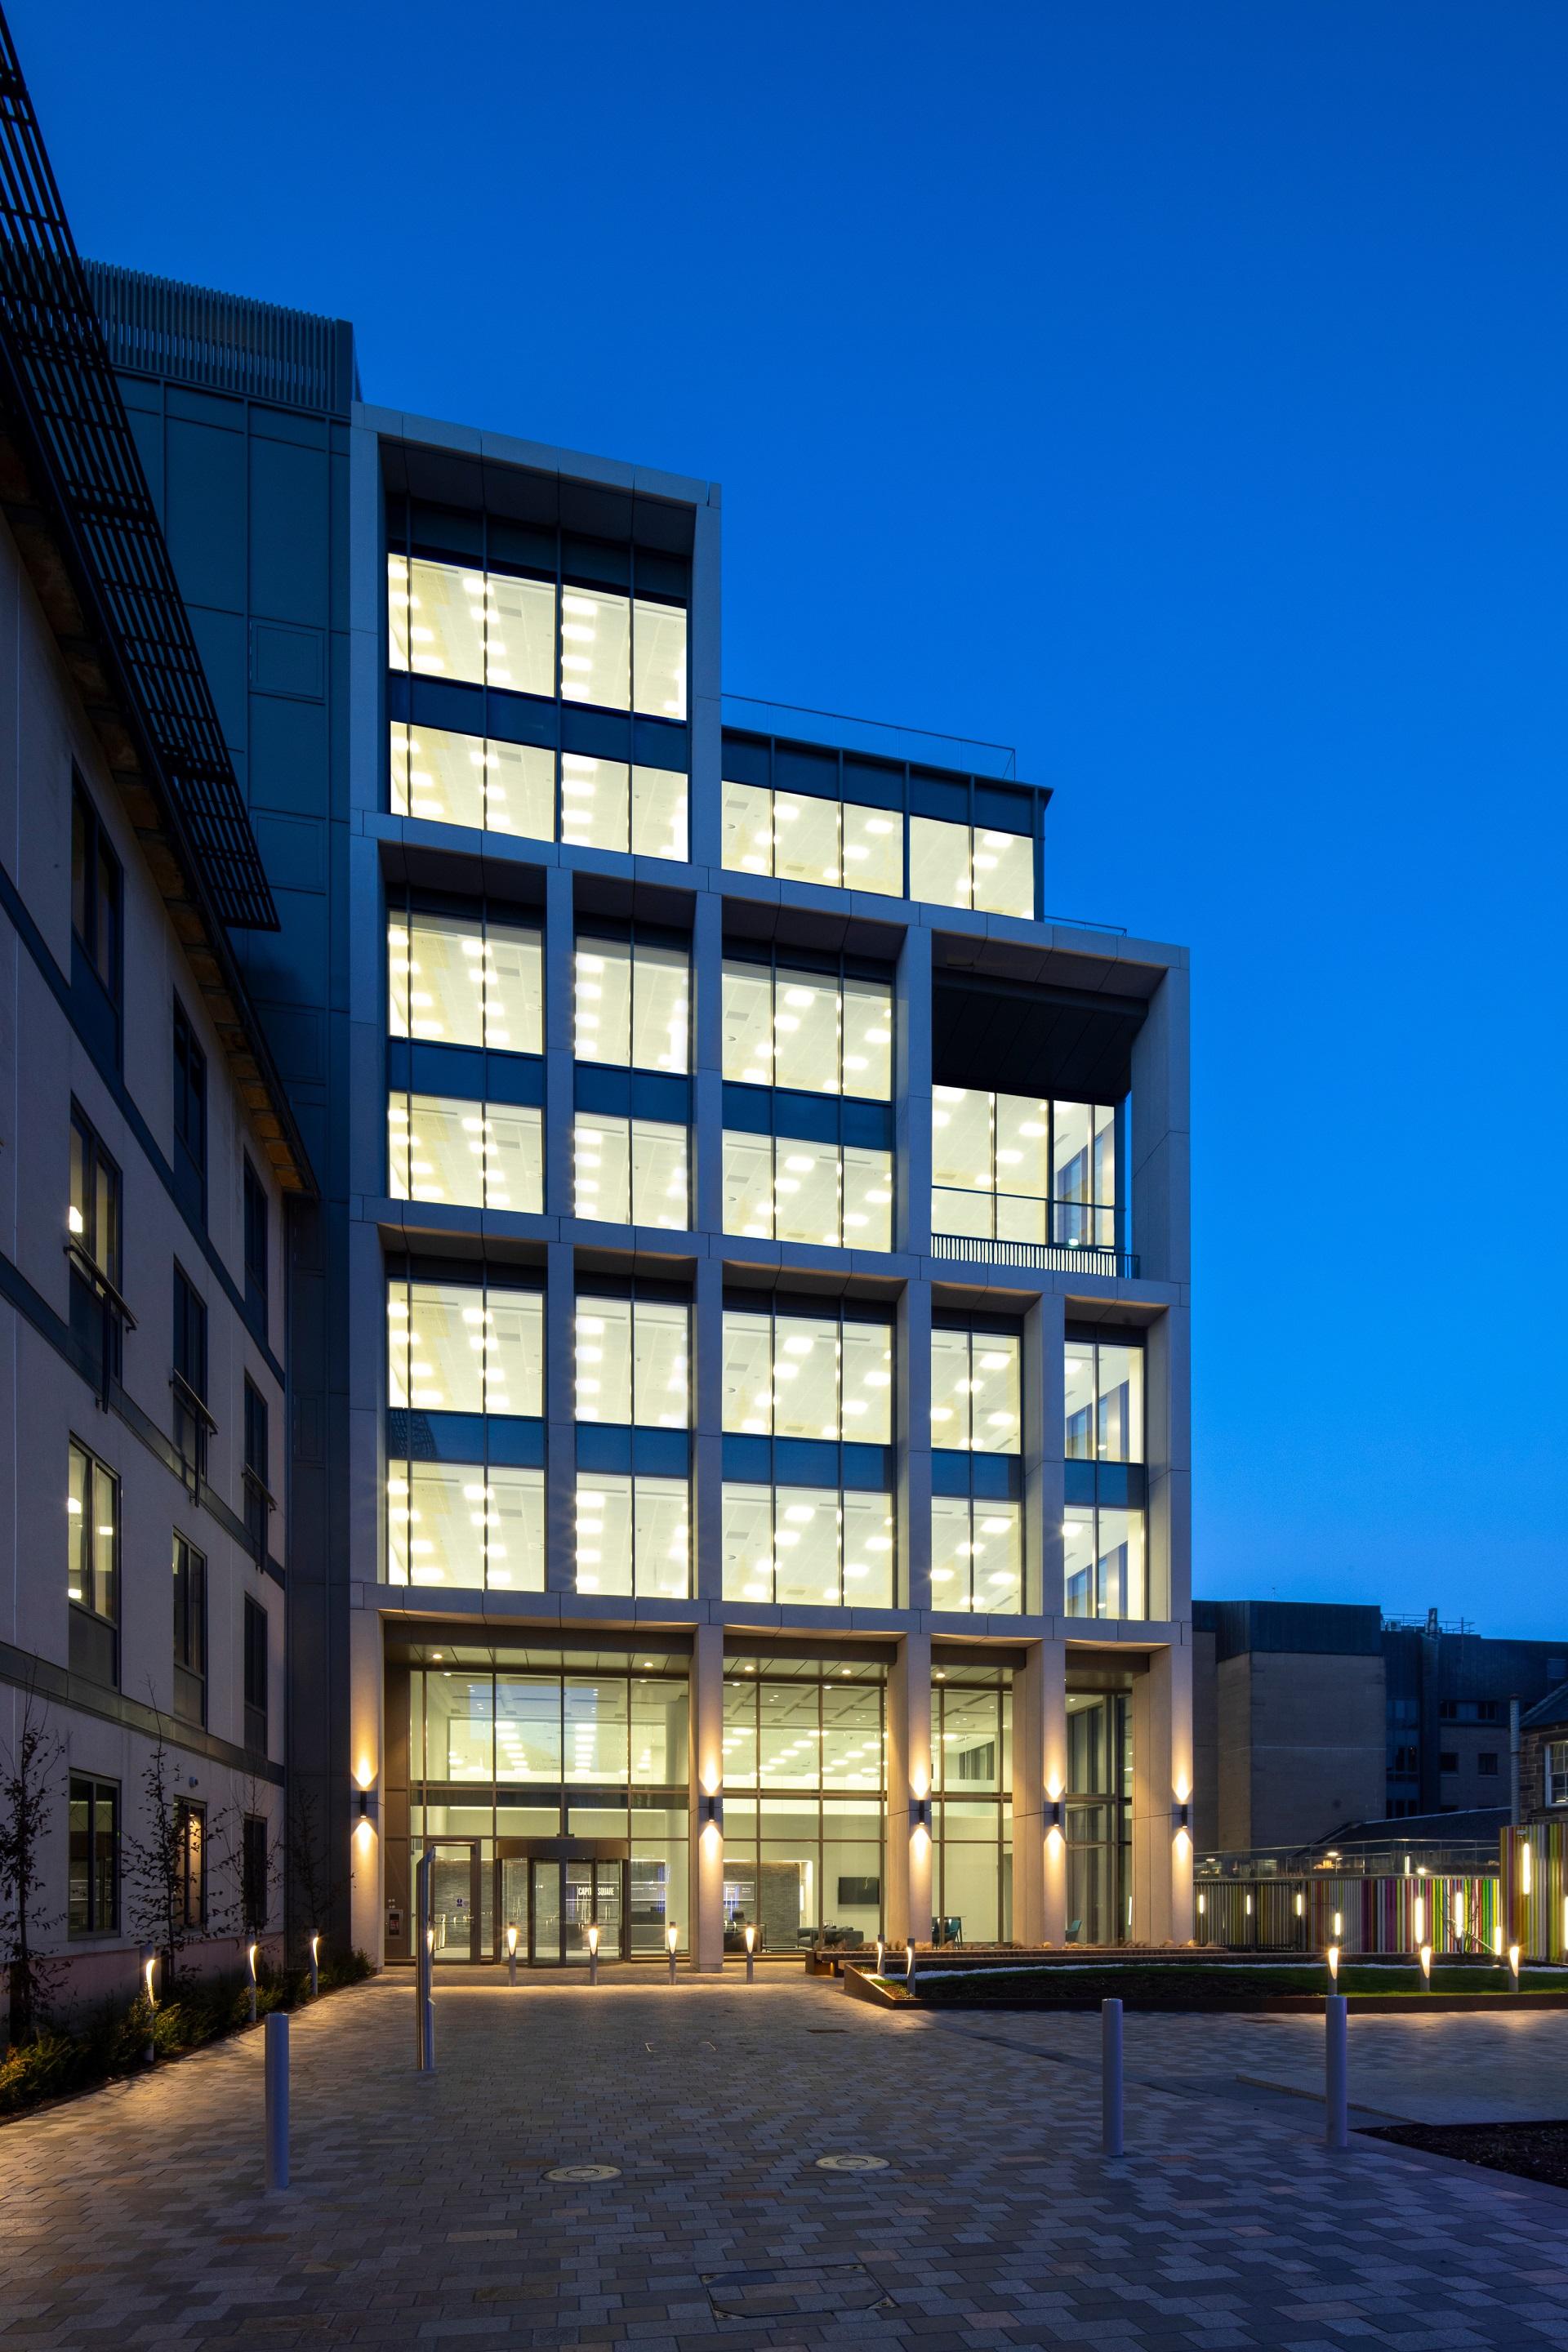 A photograph of the Capital Square office building in Edinburgh.